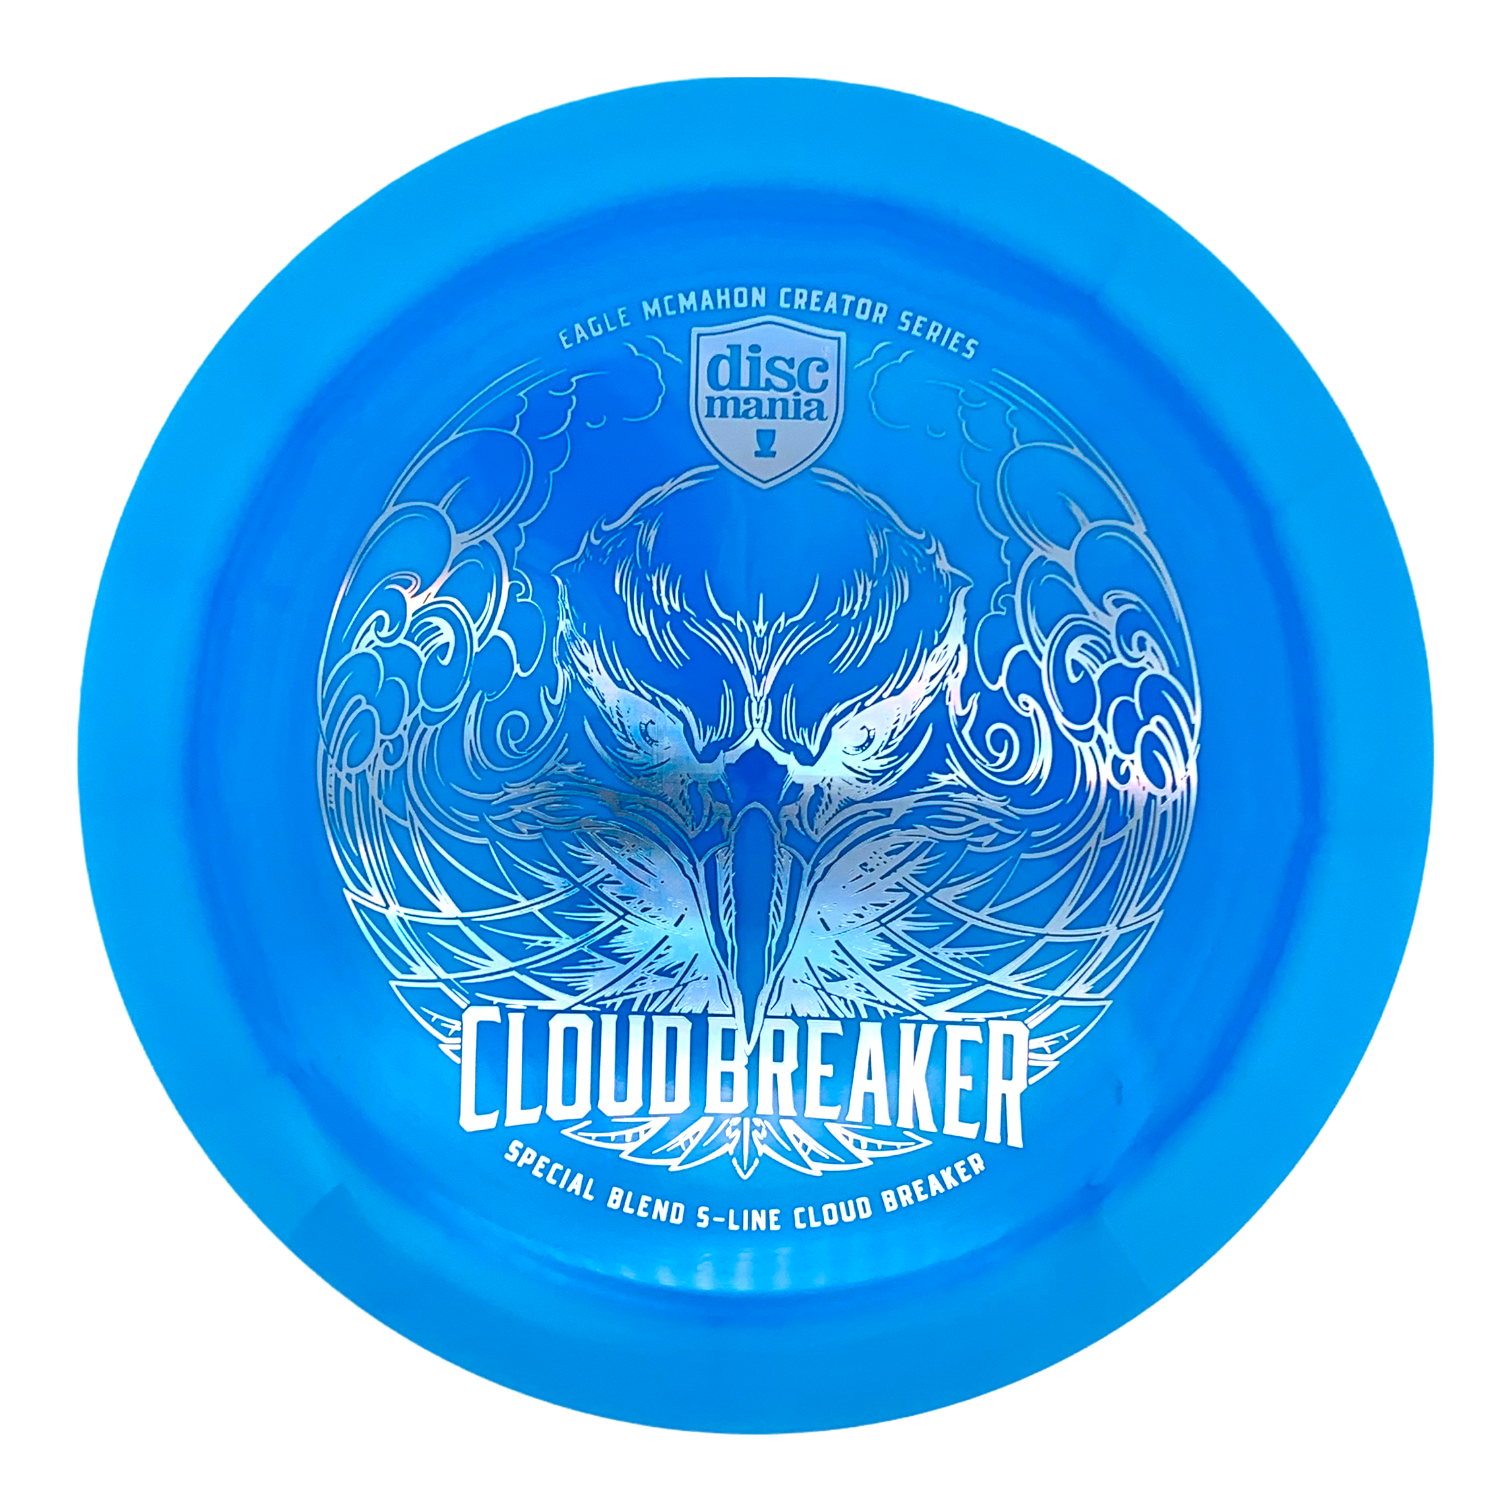 Discmania Cloud Breaker - Creator Series - X-Out - Very Good Condition